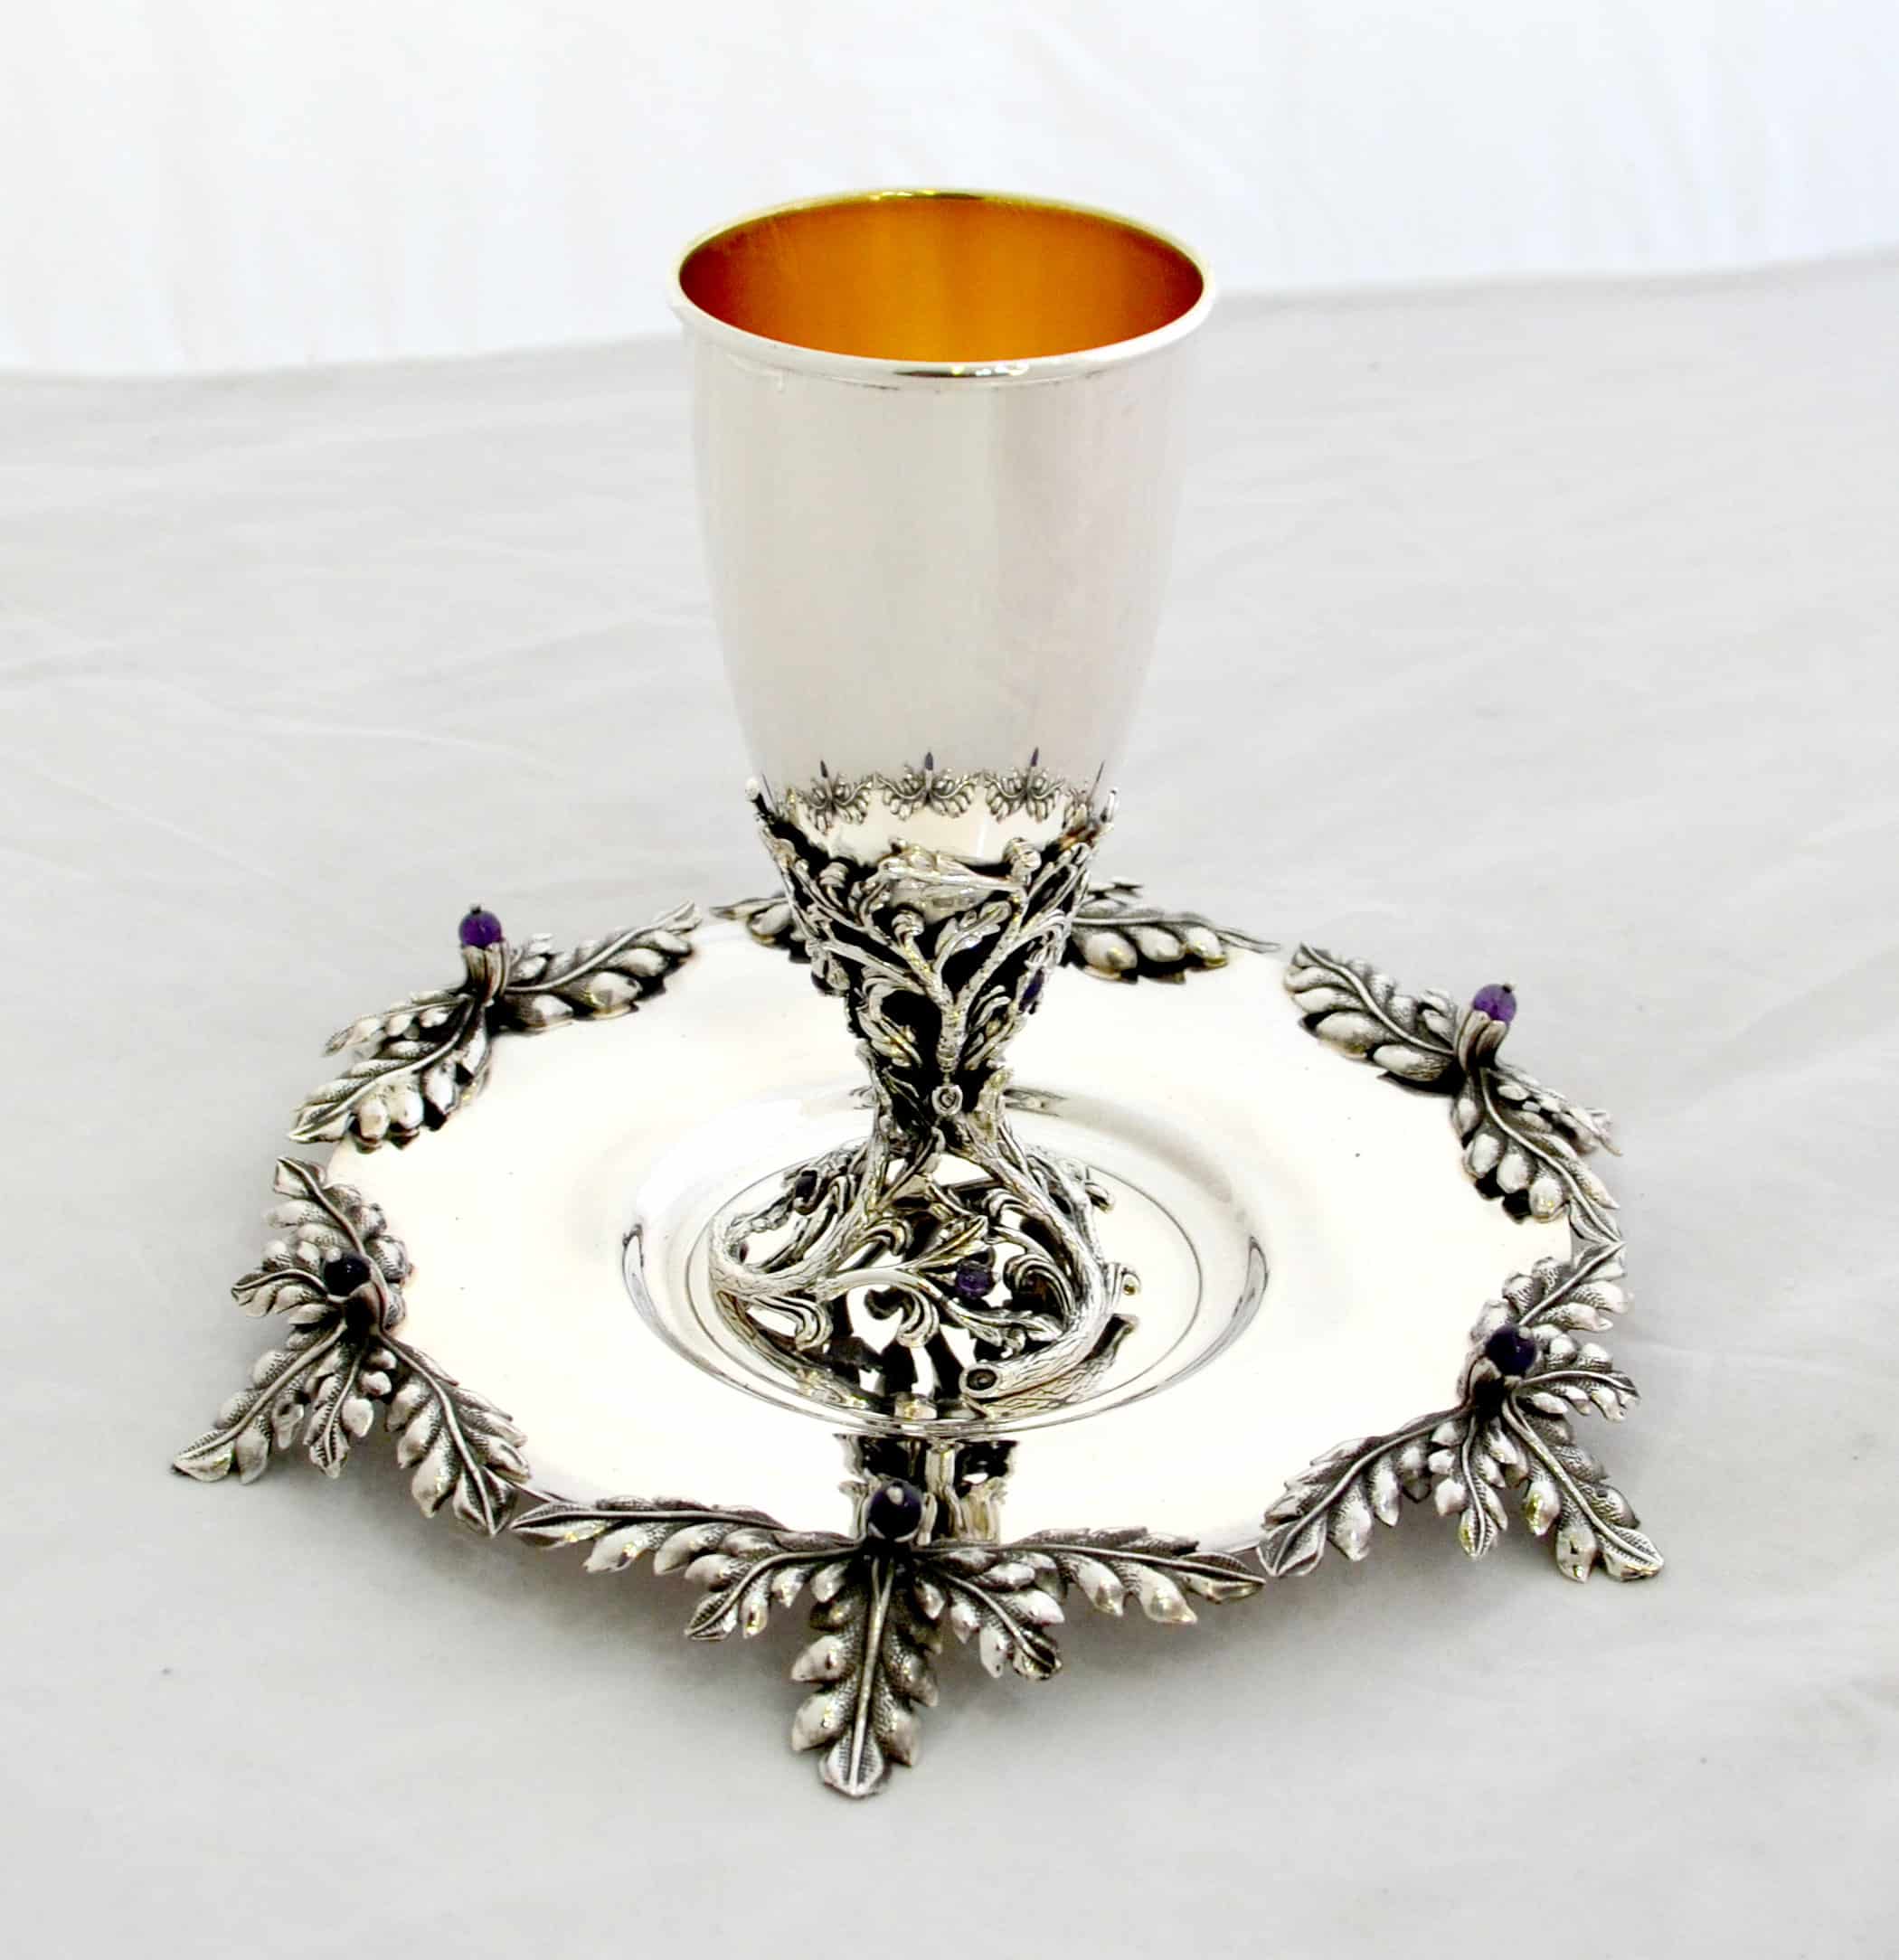 Amazing Unique Nature Inspired Piece of Art Wine Set Made of 925 Sterling Silver with Natural Amethyst Stones – Extra Large Size